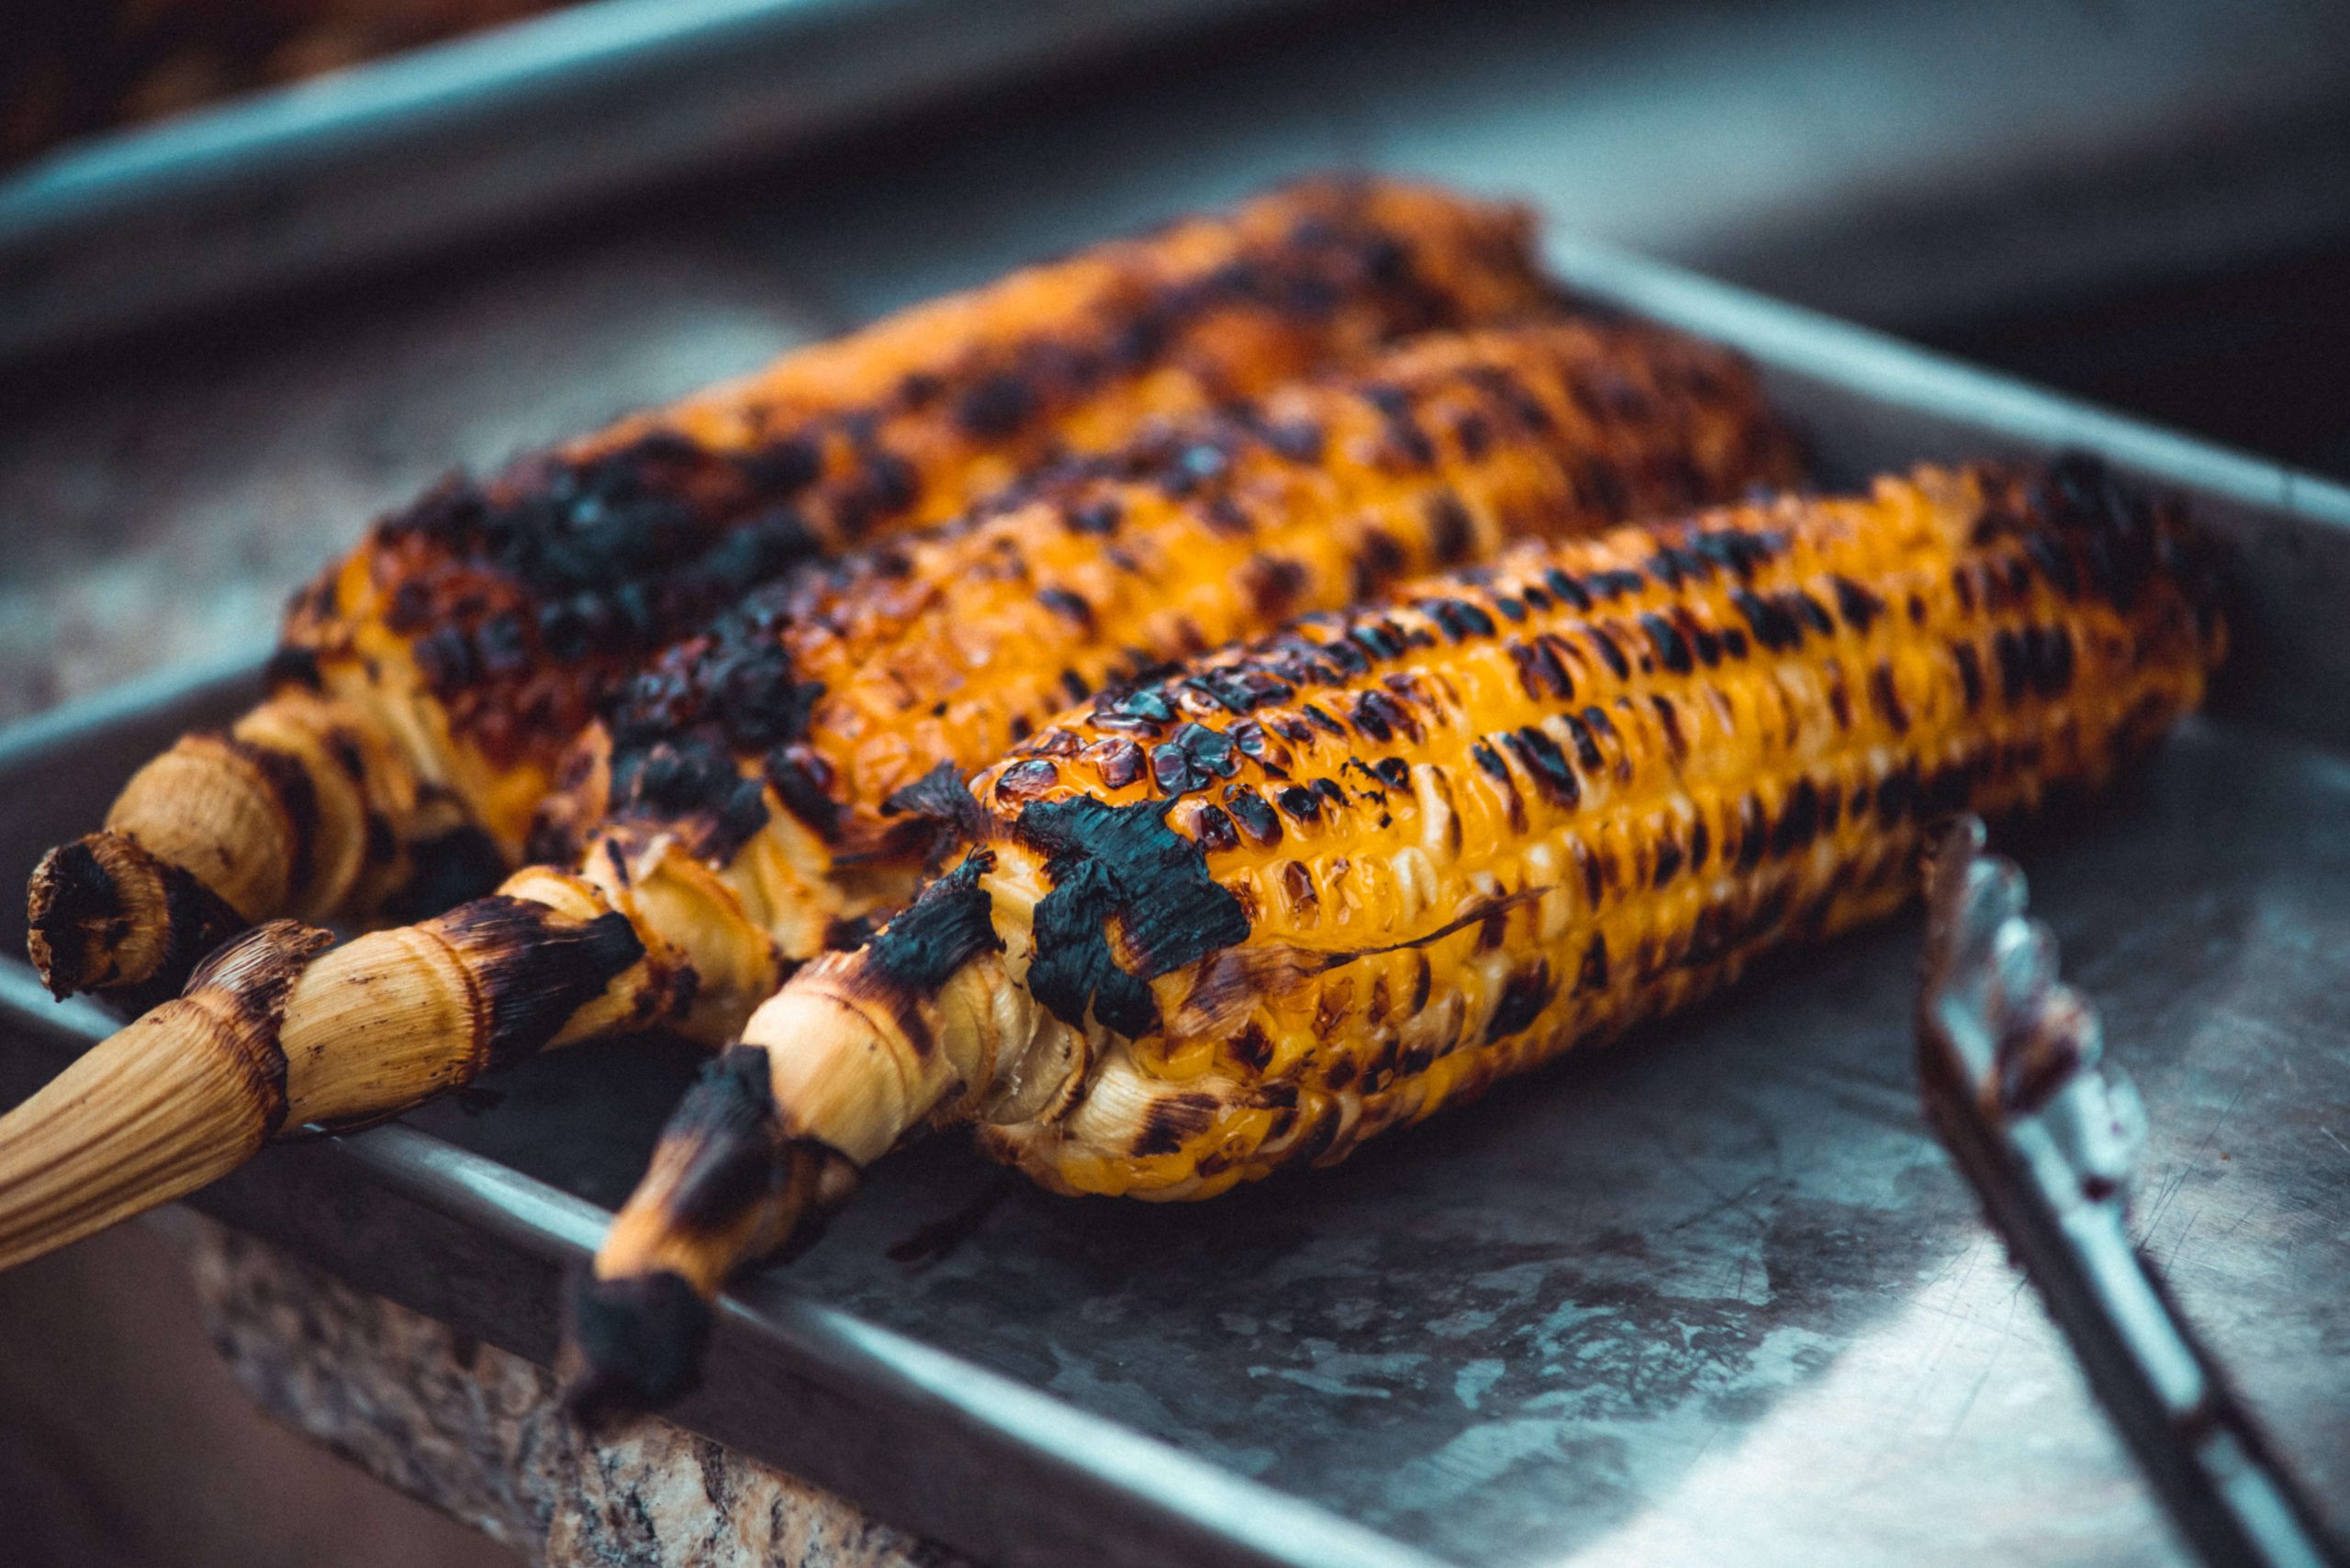 Grilled Corn on the Cob (Photo courtesy of Old Tucson)